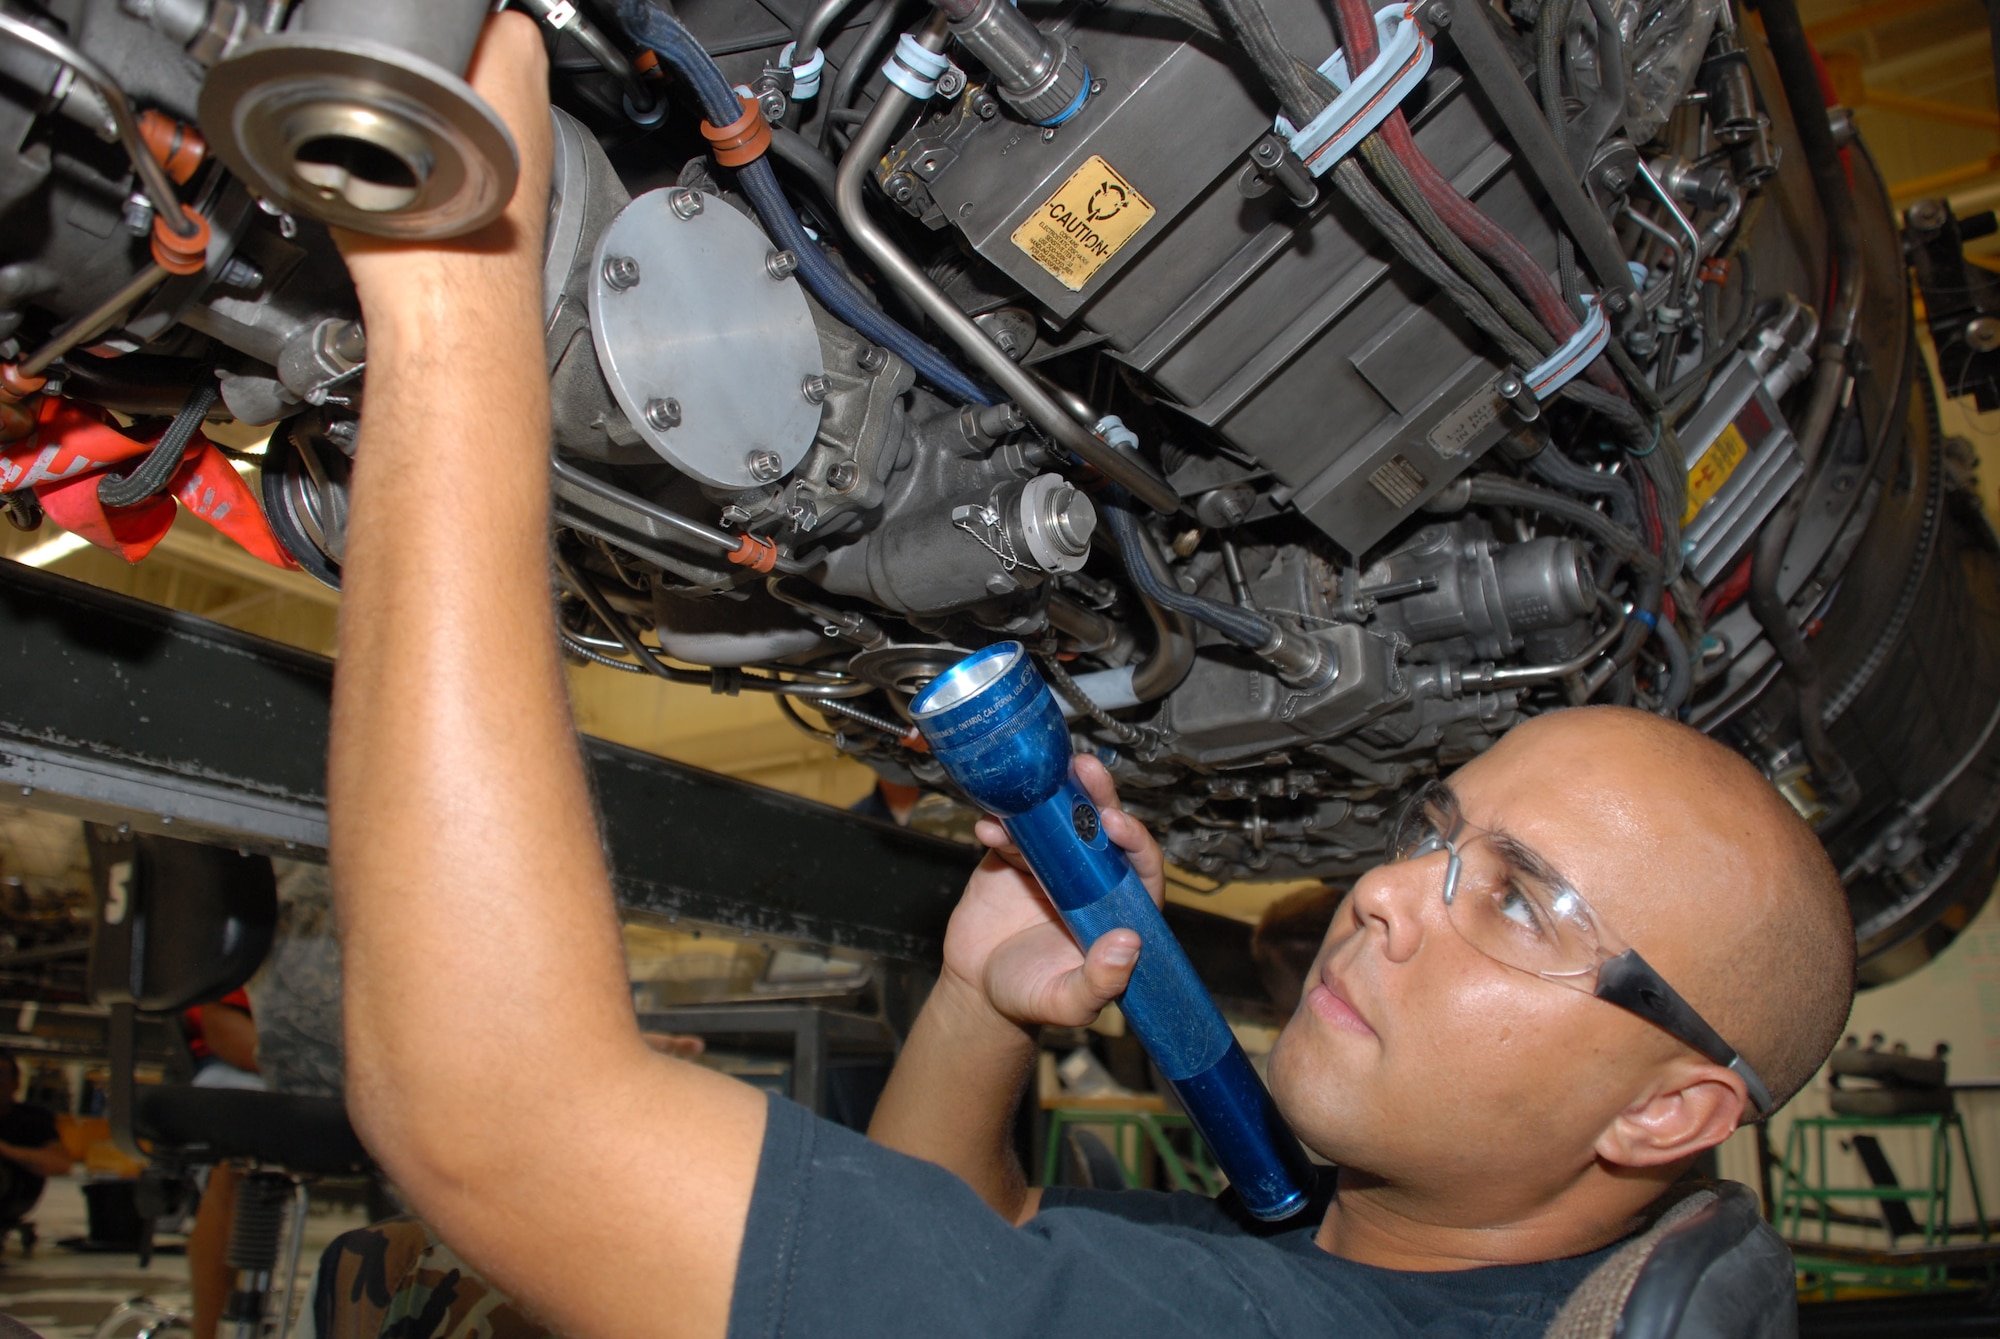 Staff Sgt. Joshua Garcia, 56th Component Maintenance Squadron engine mechanic, inspects the gearbox of a jet engine in the propulsion engine shop. (U.S. AIR FORCE PHOTO/ Airman 1st Class Tracie Forte.)